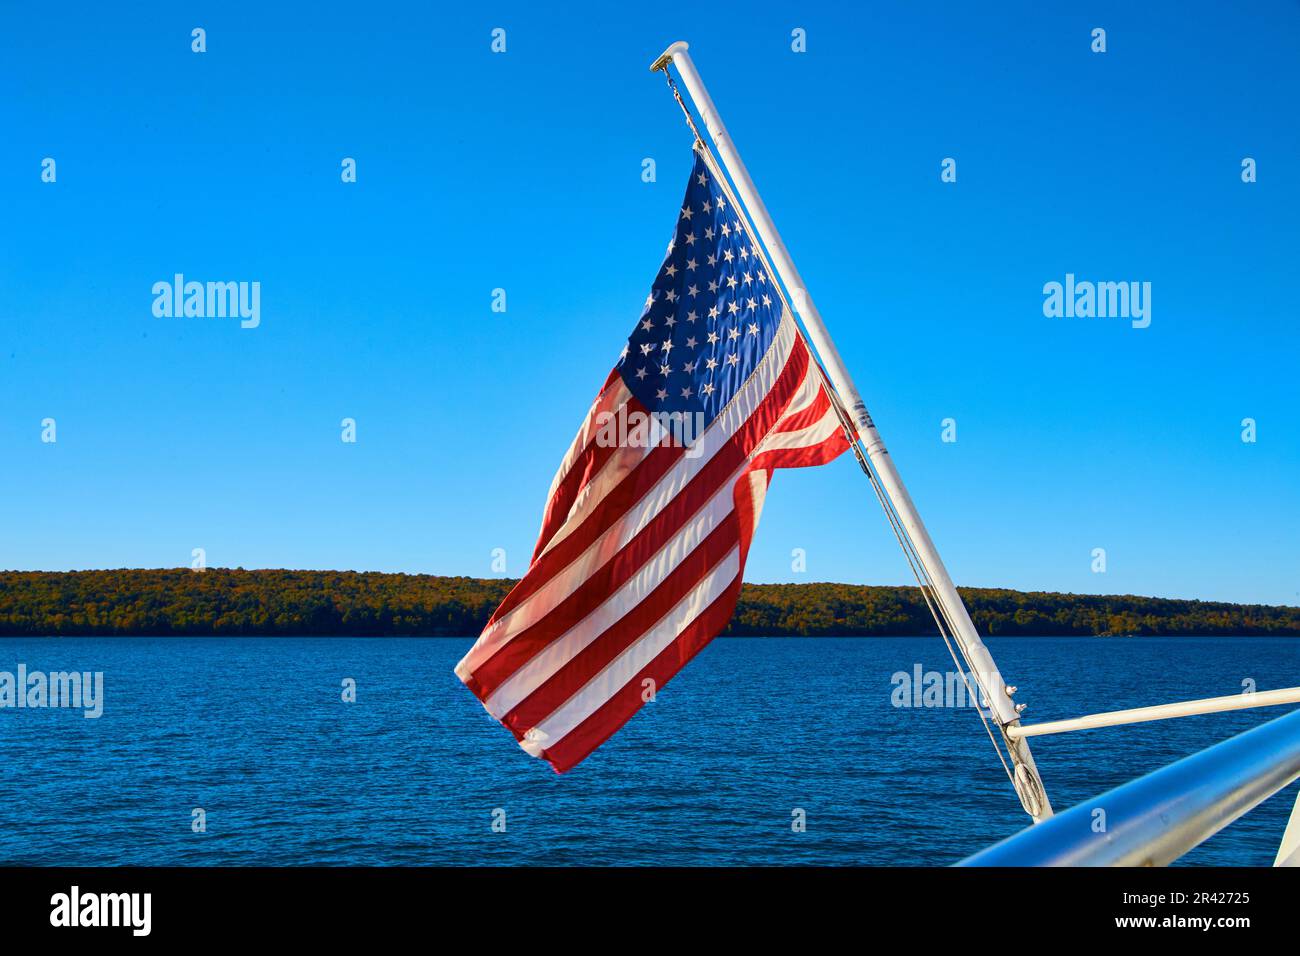 American flag hanging off boat with distant shore and calm lake or river waters Stock Photo